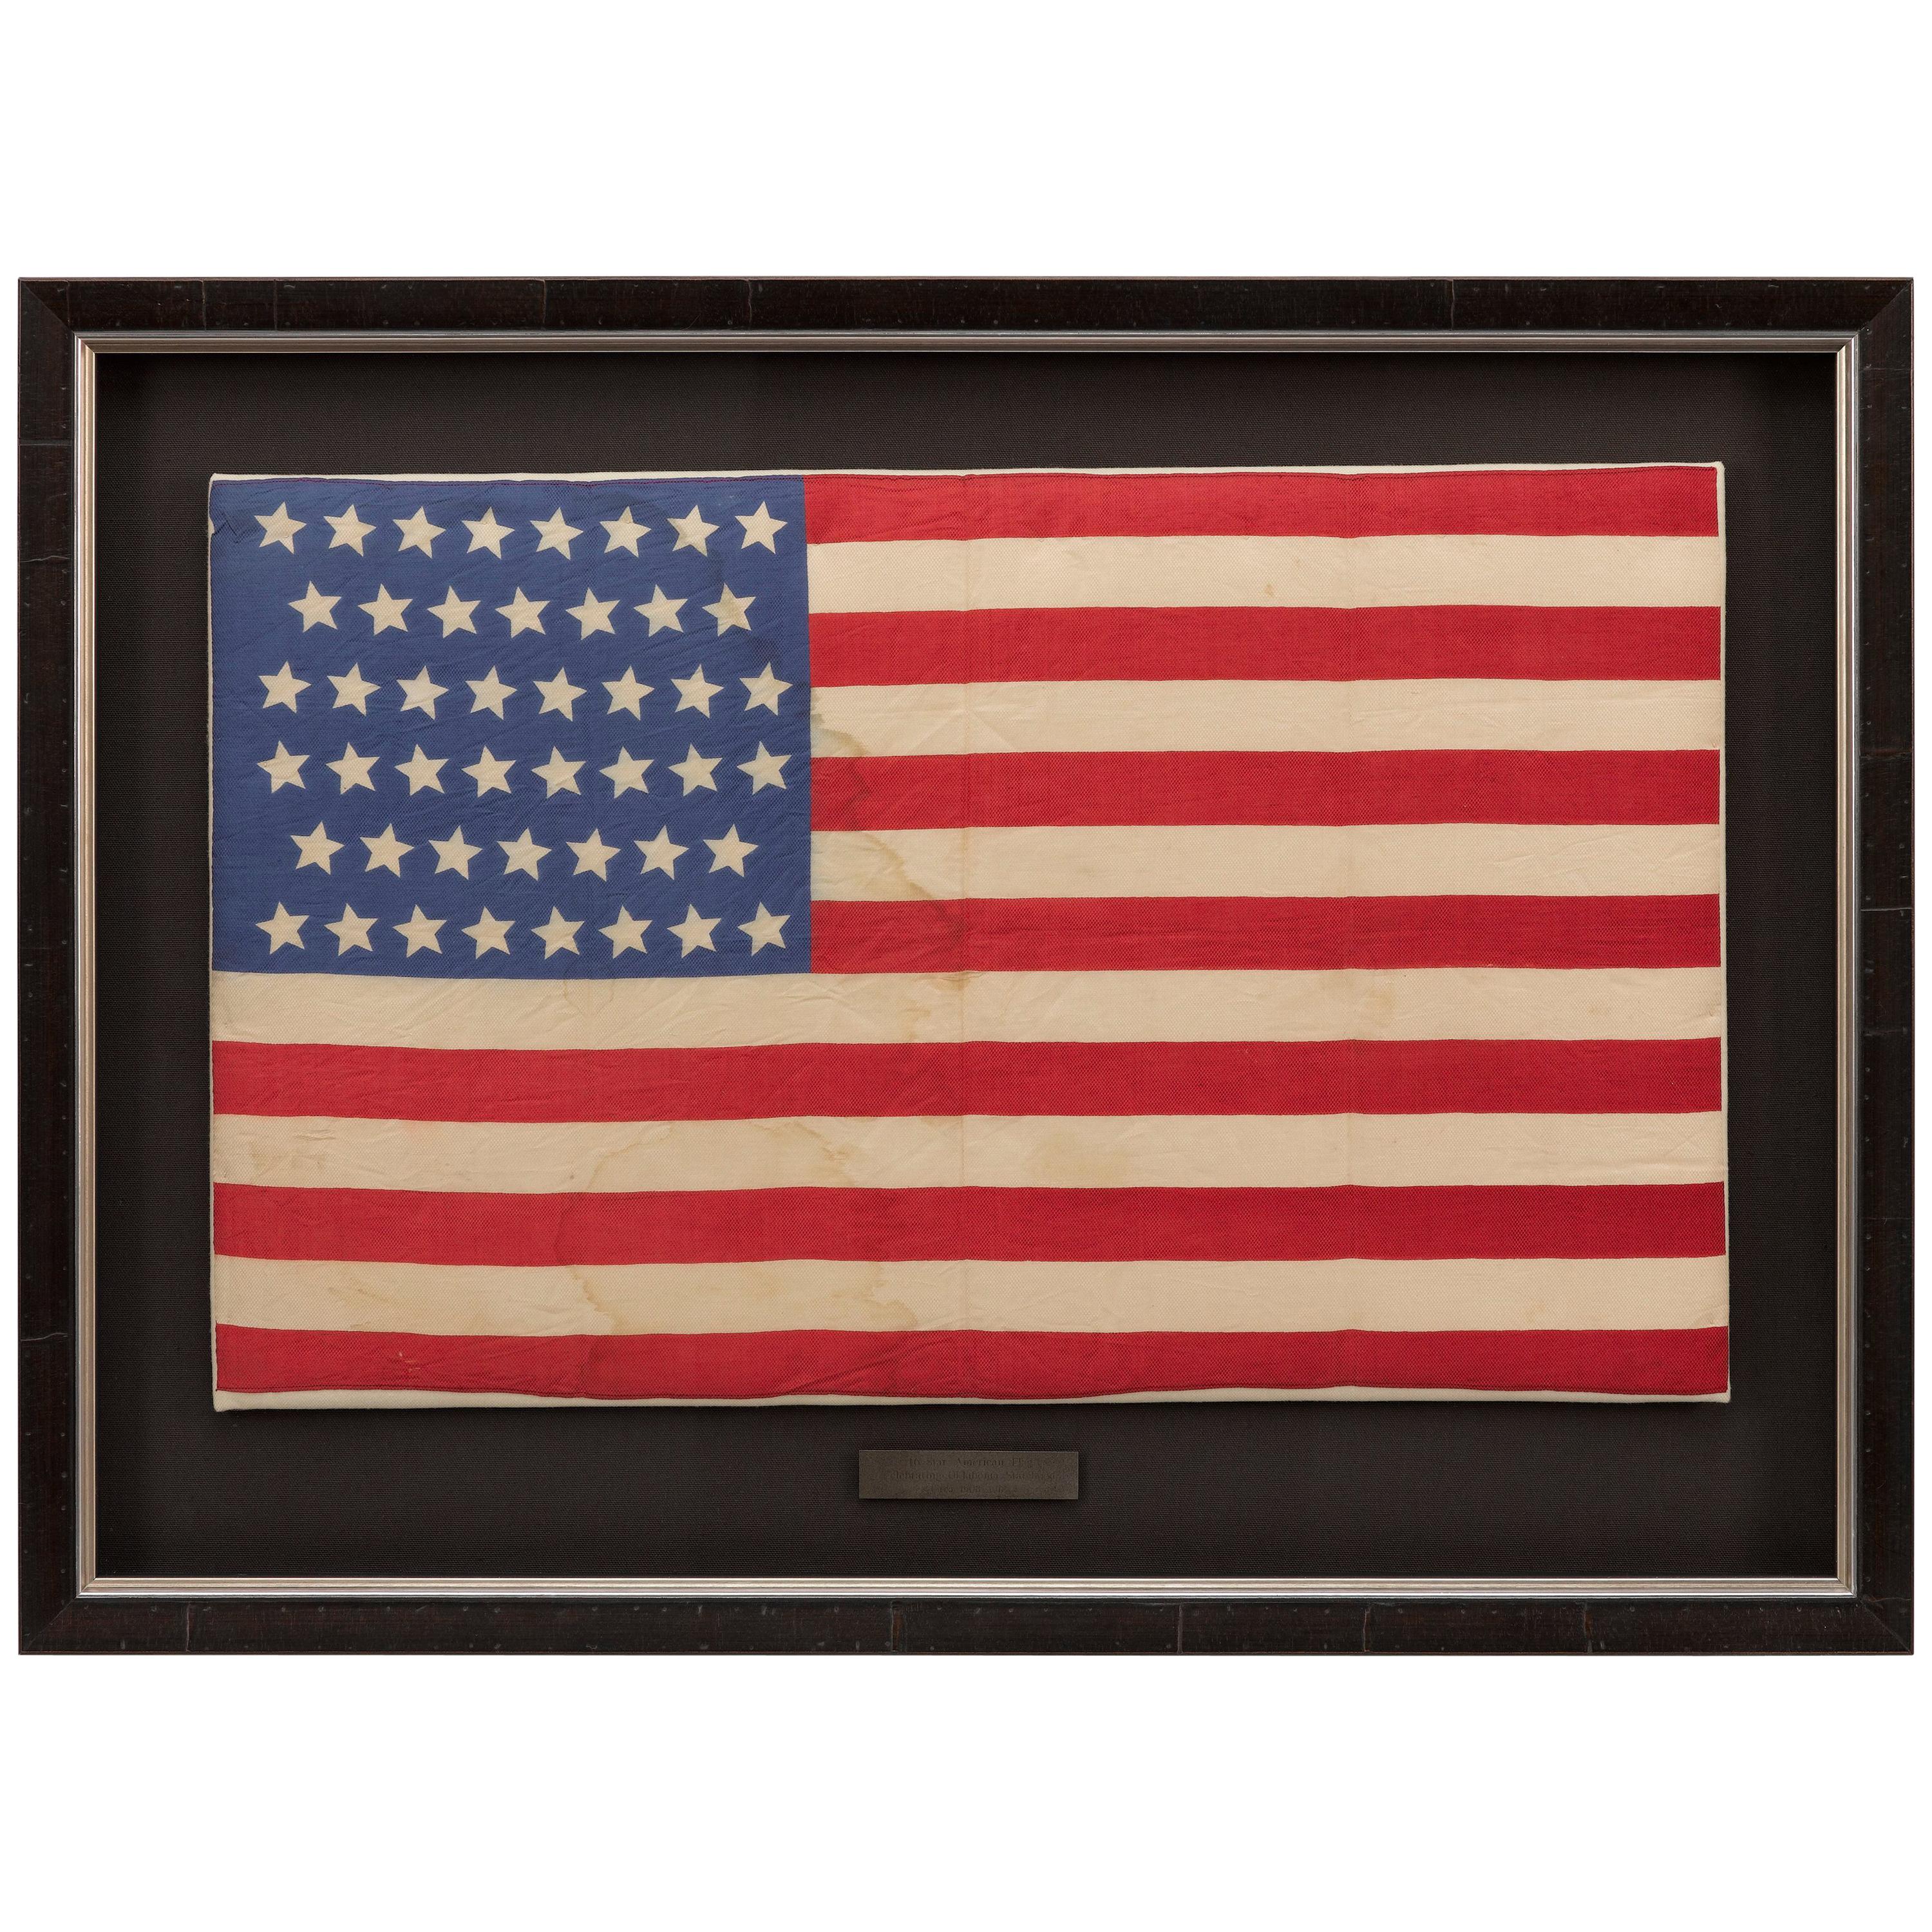 46-Star American Flag, Antique Printed on Silk, Early 20th Century